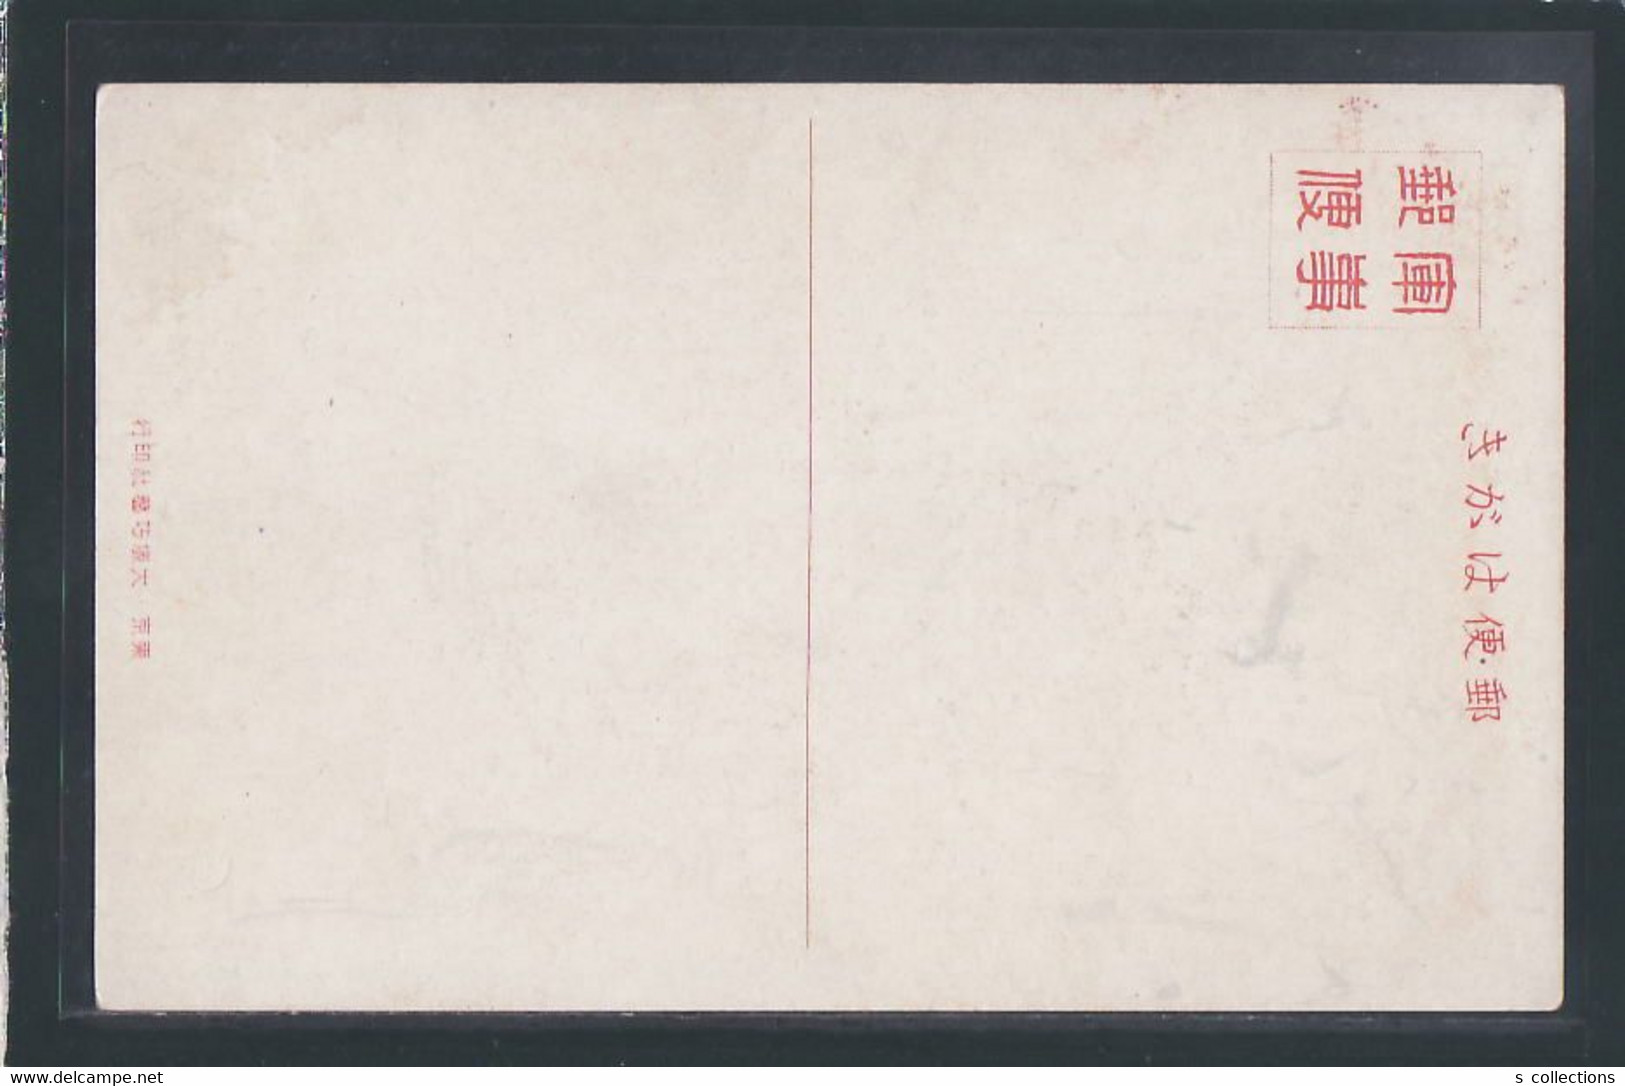 JAPAN WWII Military cover North China 5 picture postcard Chine WW2 Japon Gippone